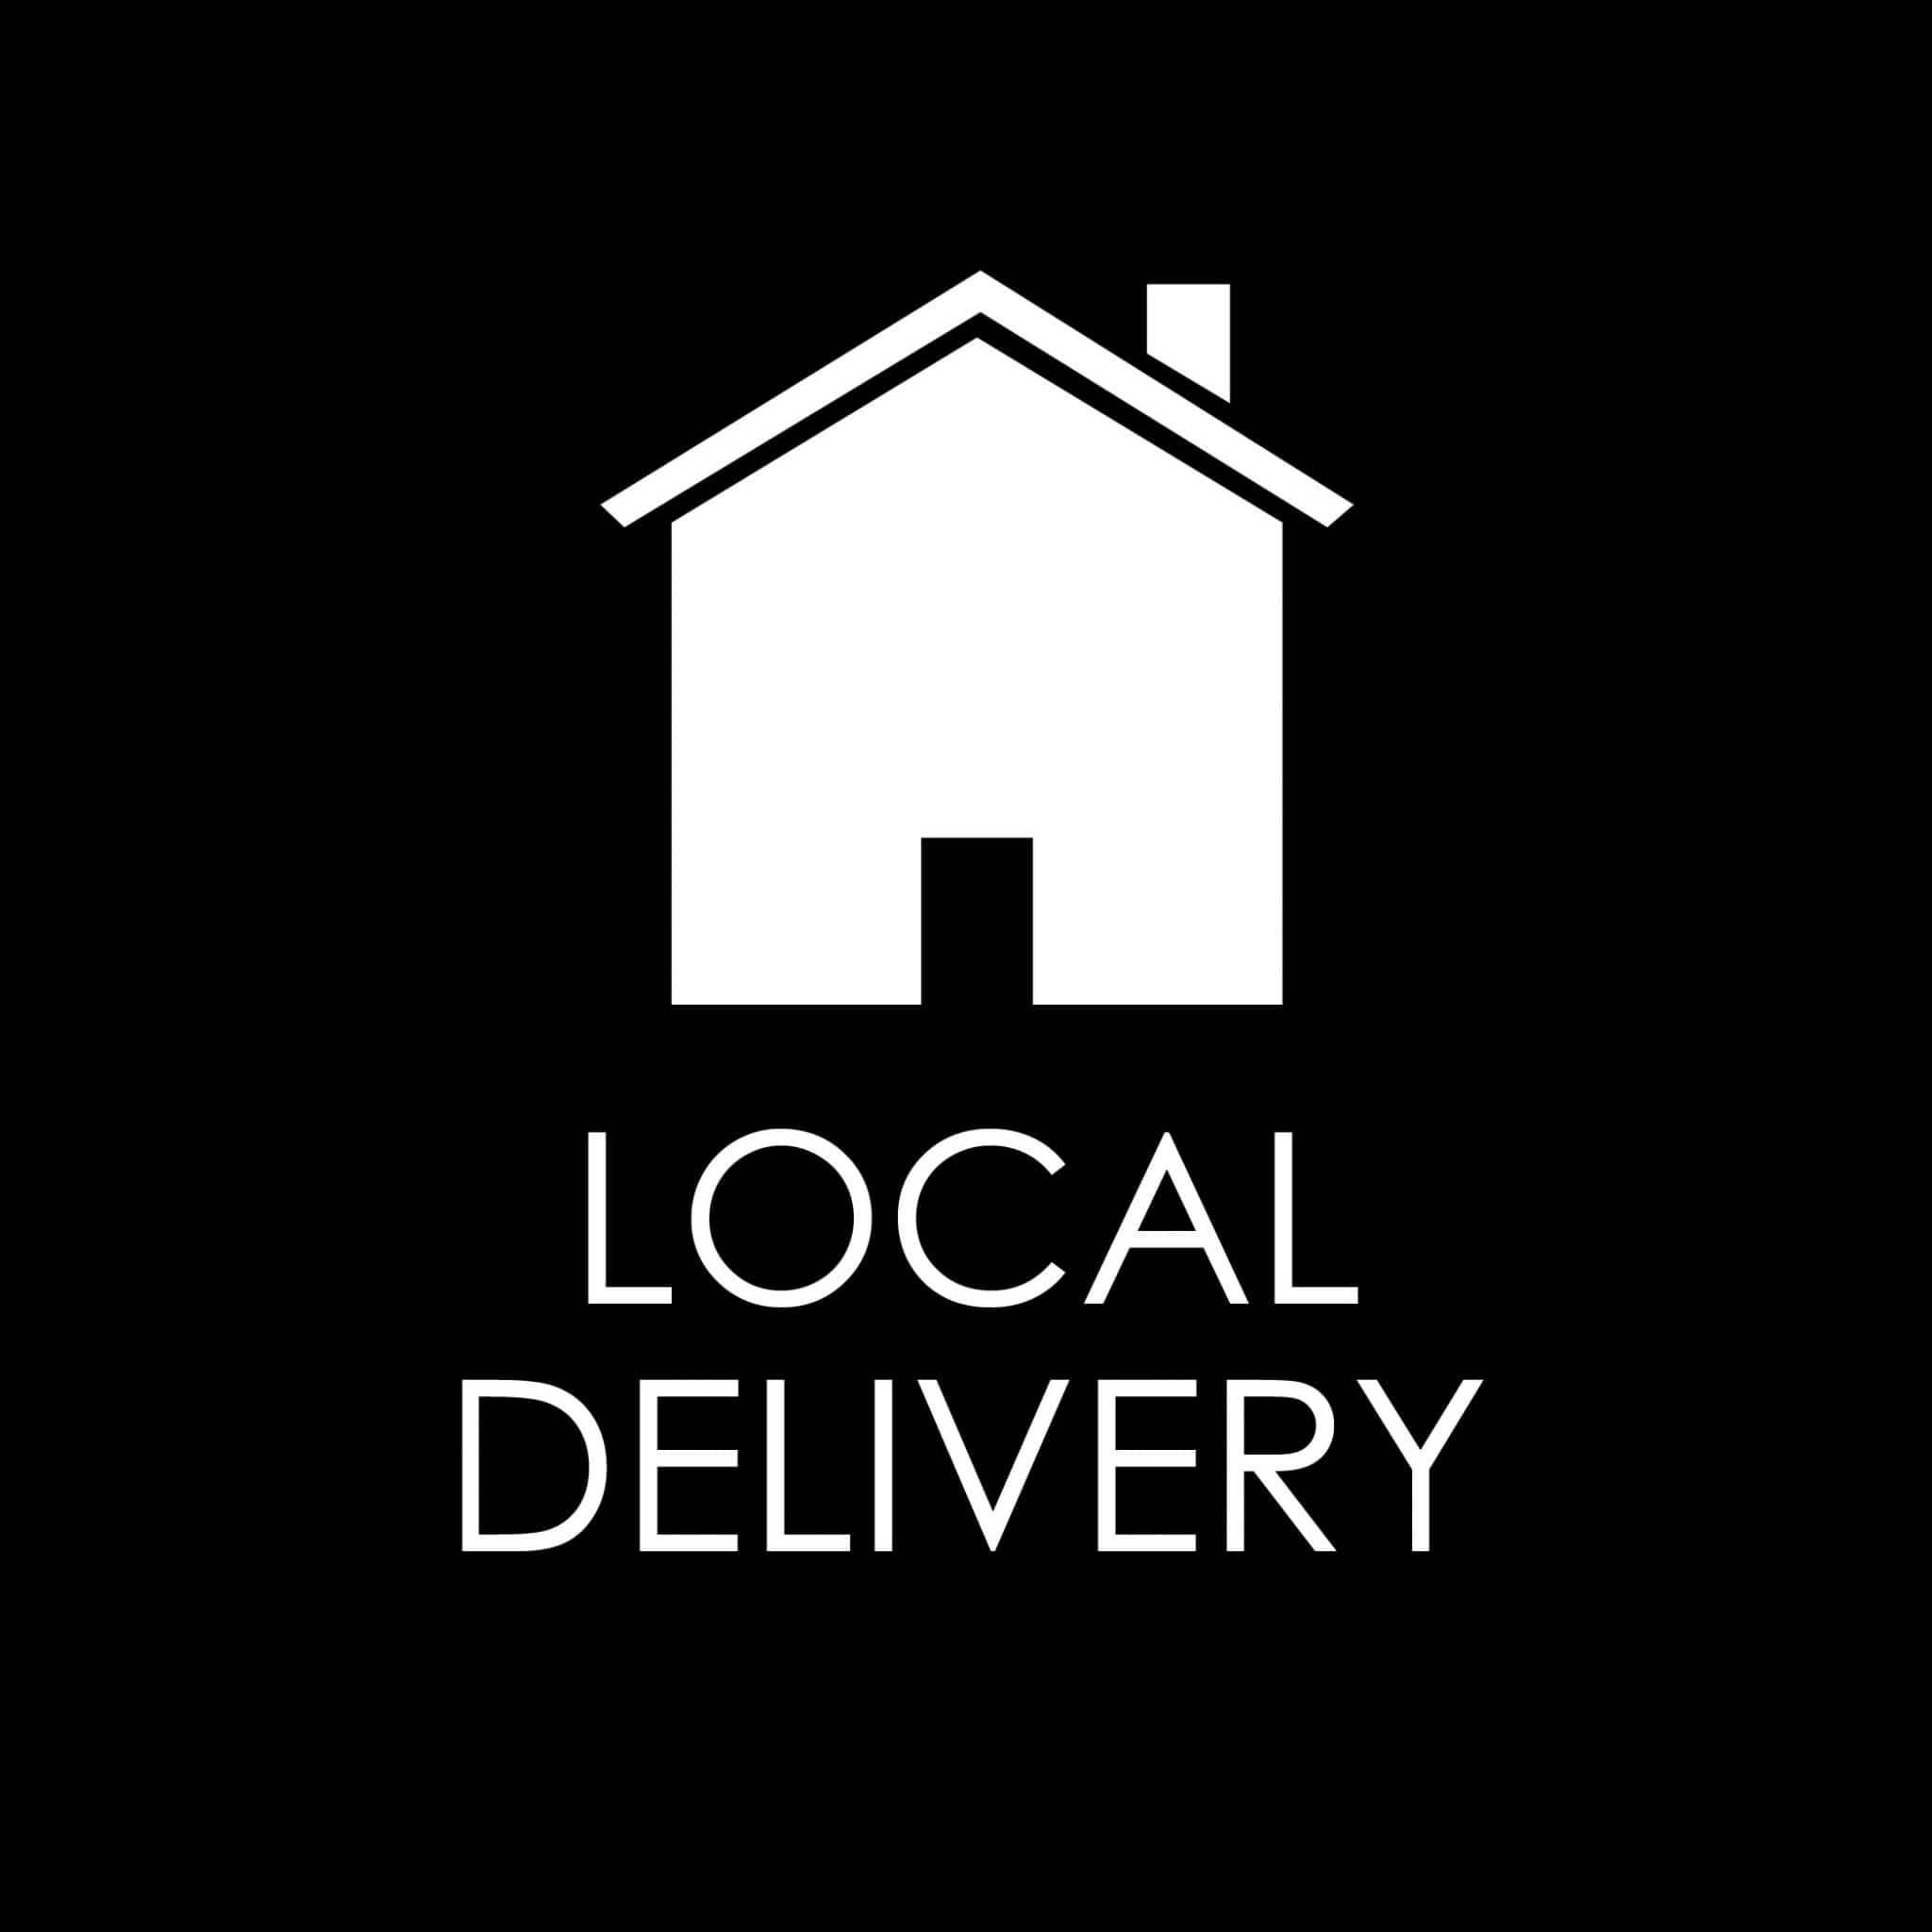 local delivery